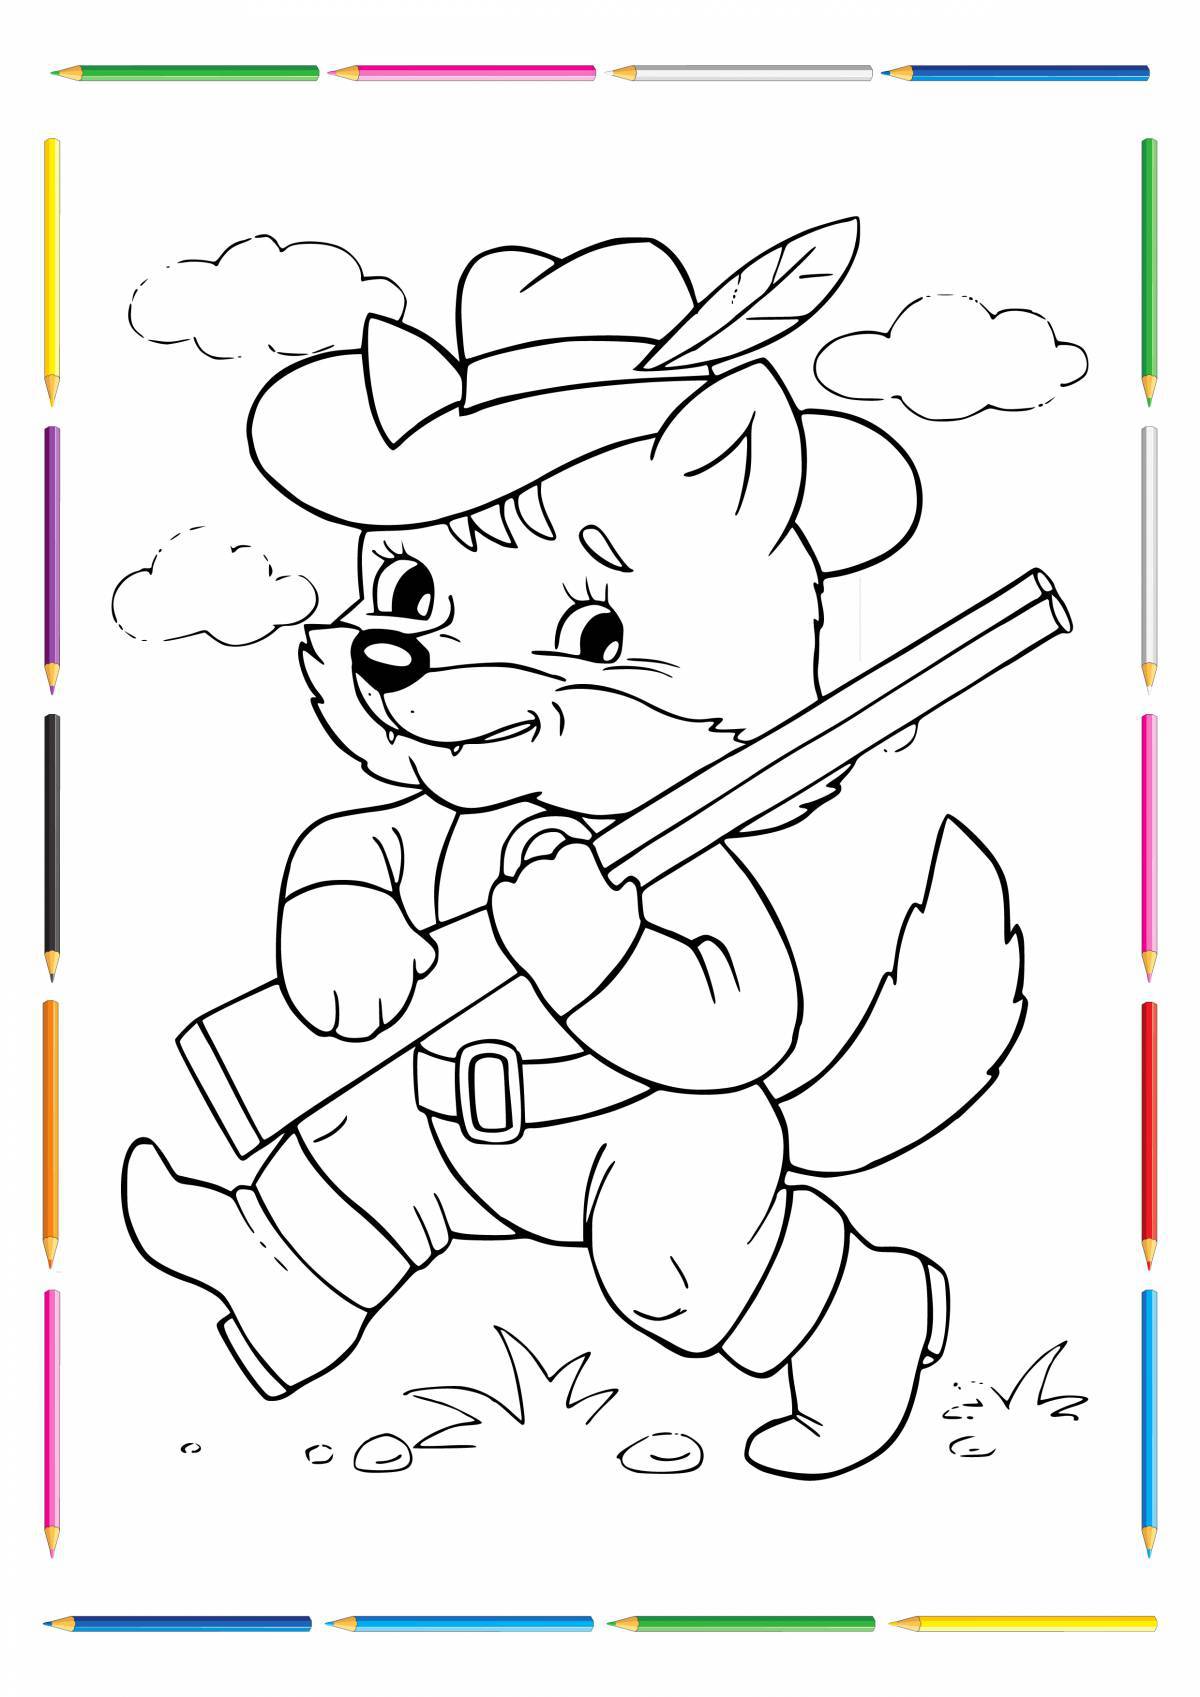 Joyful coloring for children 5-6 years old